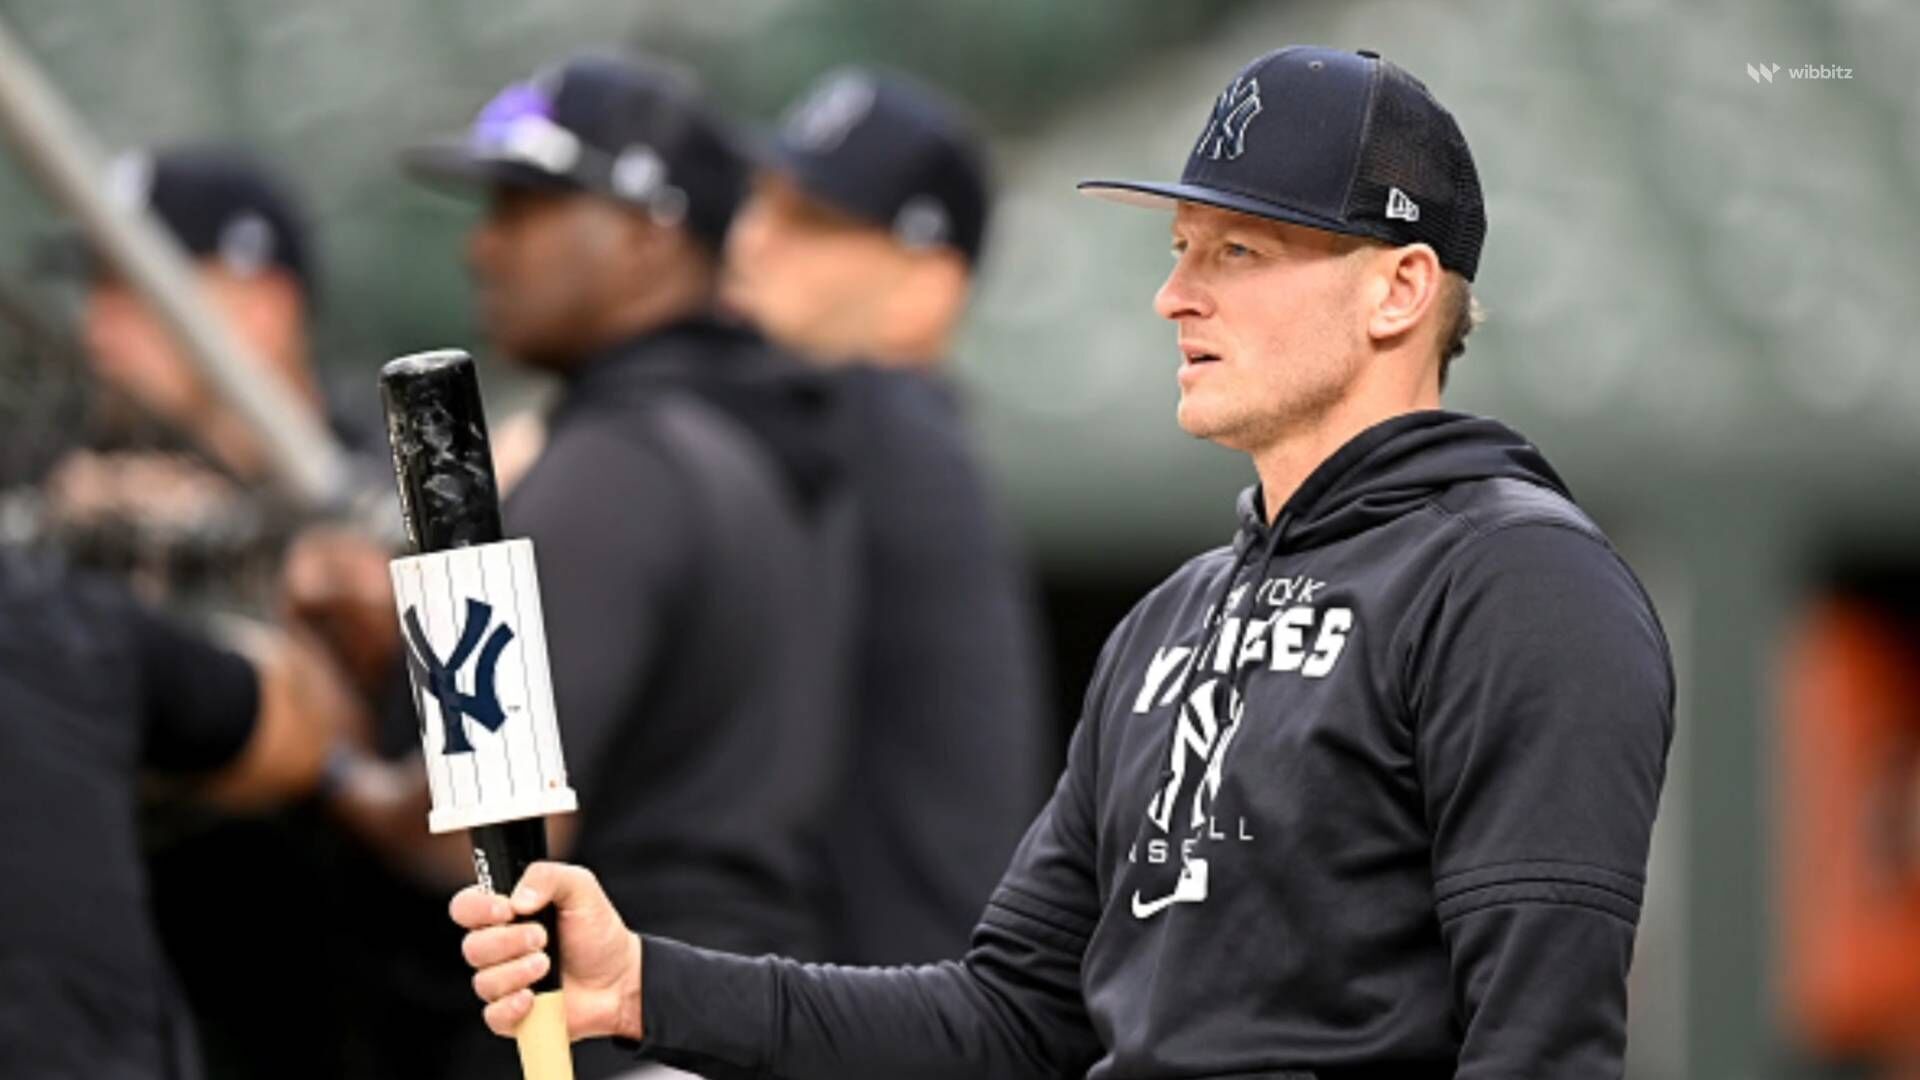 MLB suspends Yankees Josh Donaldson for inappropriate comments